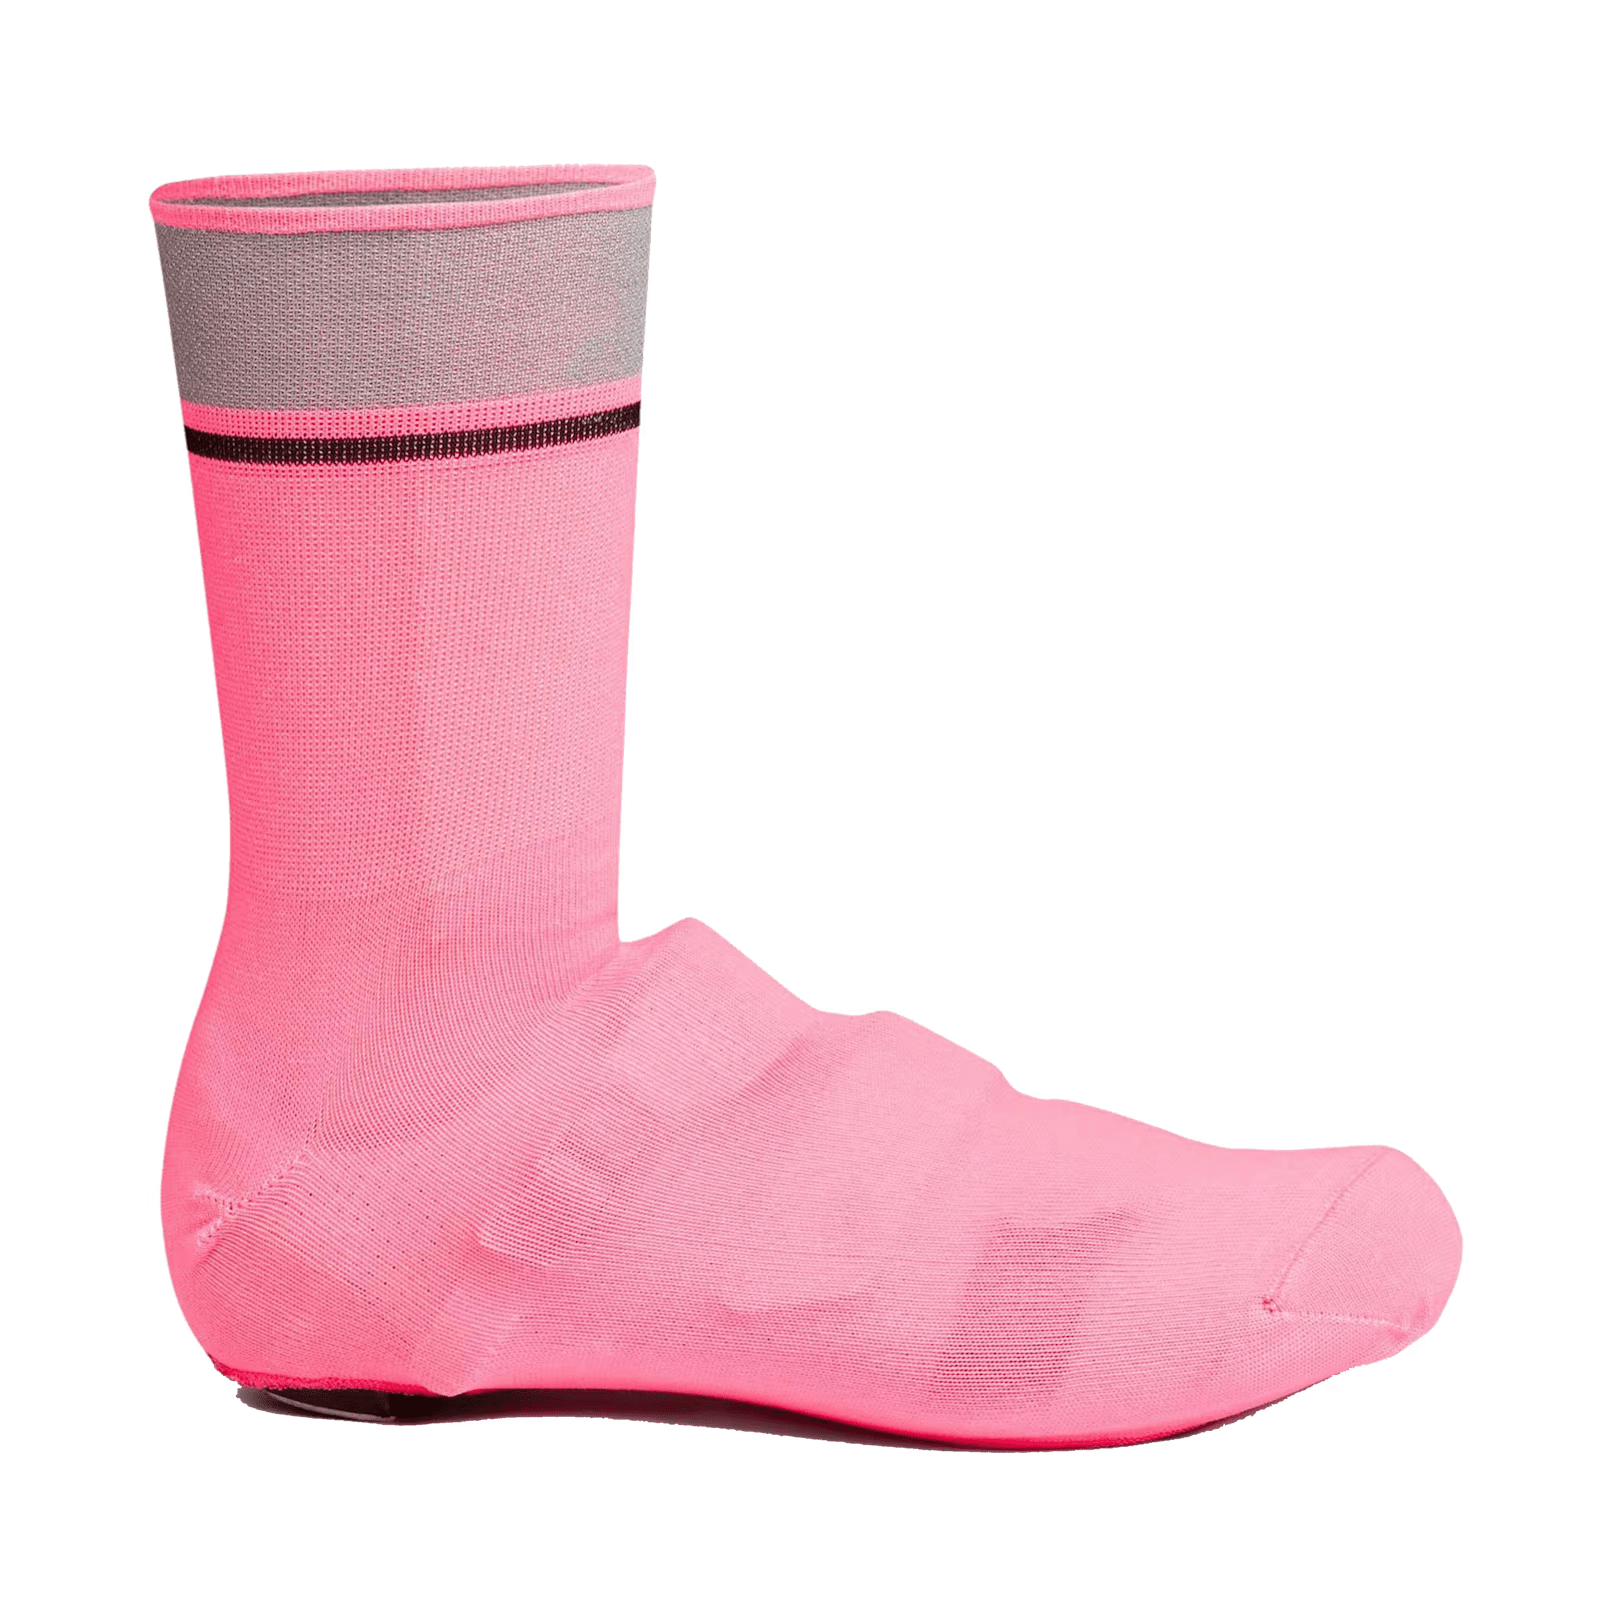 Rapha Reflective Oversocks High-Vis Pink / M Apparel - Apparel Accessories - Shoe Covers